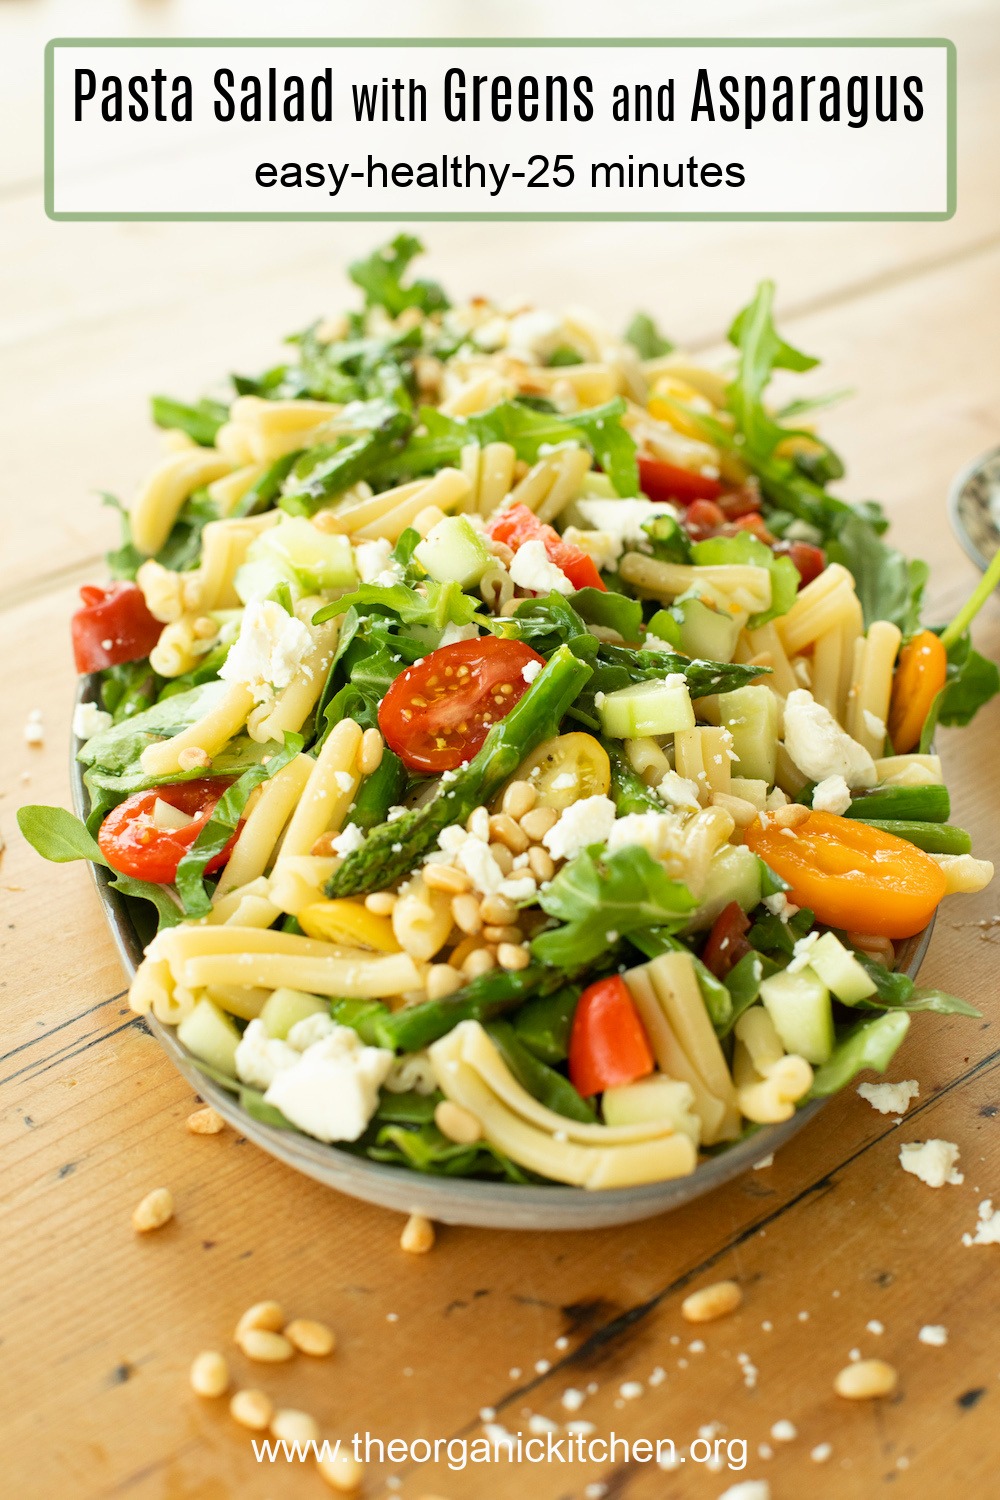 A platter of Pasta Salad with Greens and Asparagus garnished with pine nuts and feta